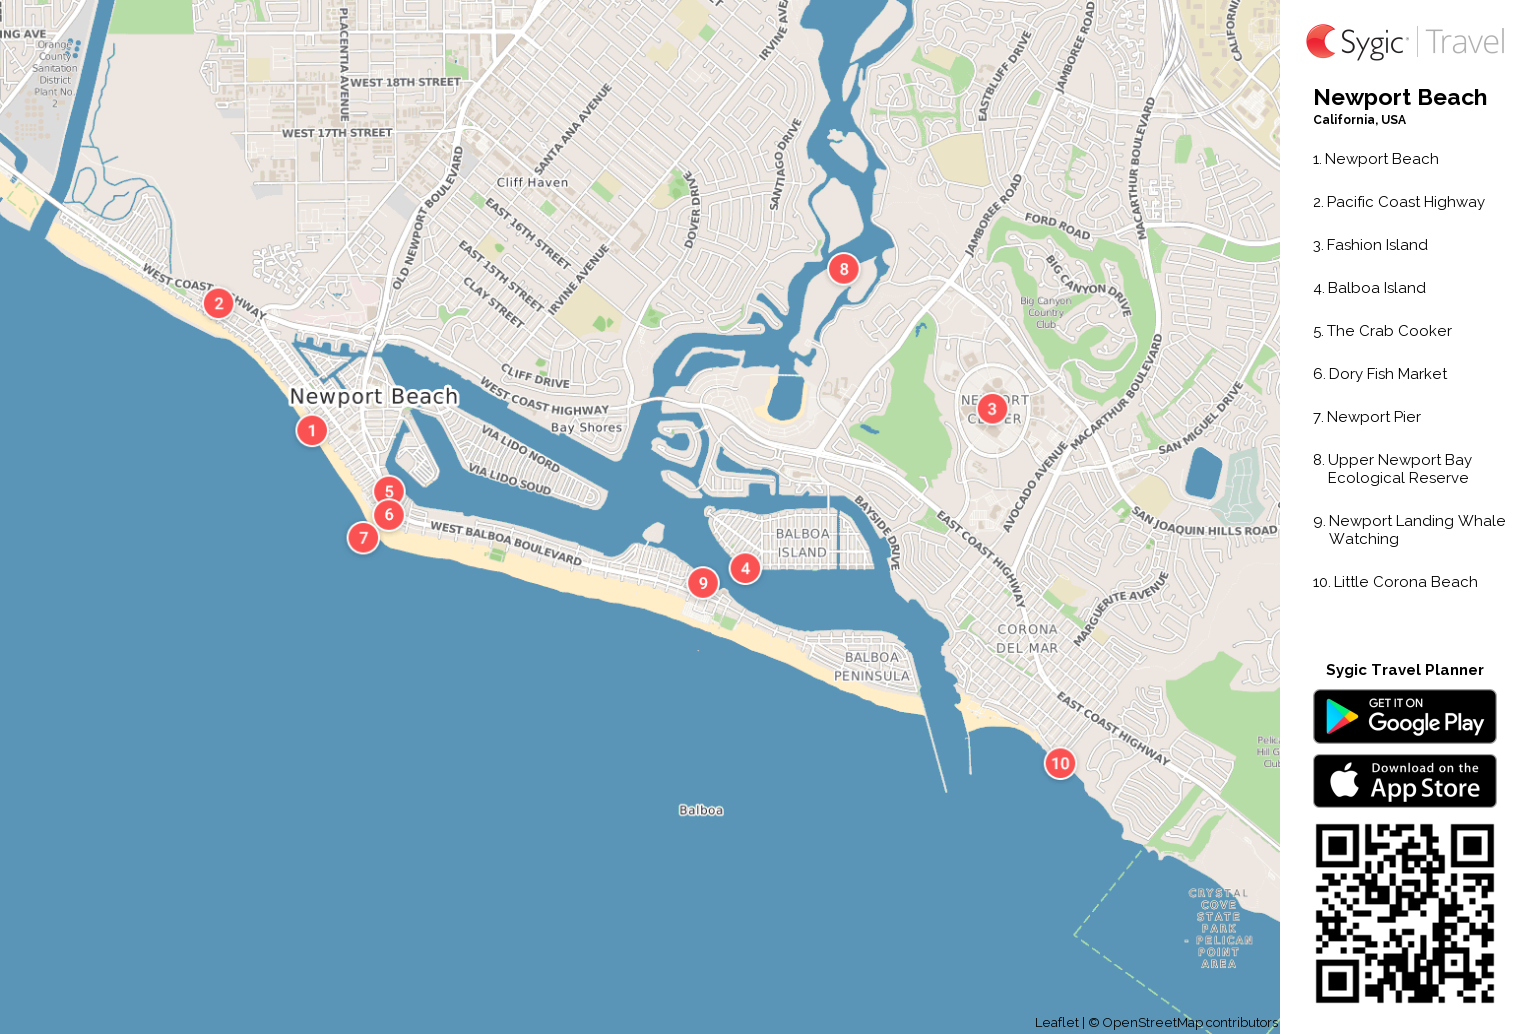 View and download the map of Newport Beach, CA. This map will help